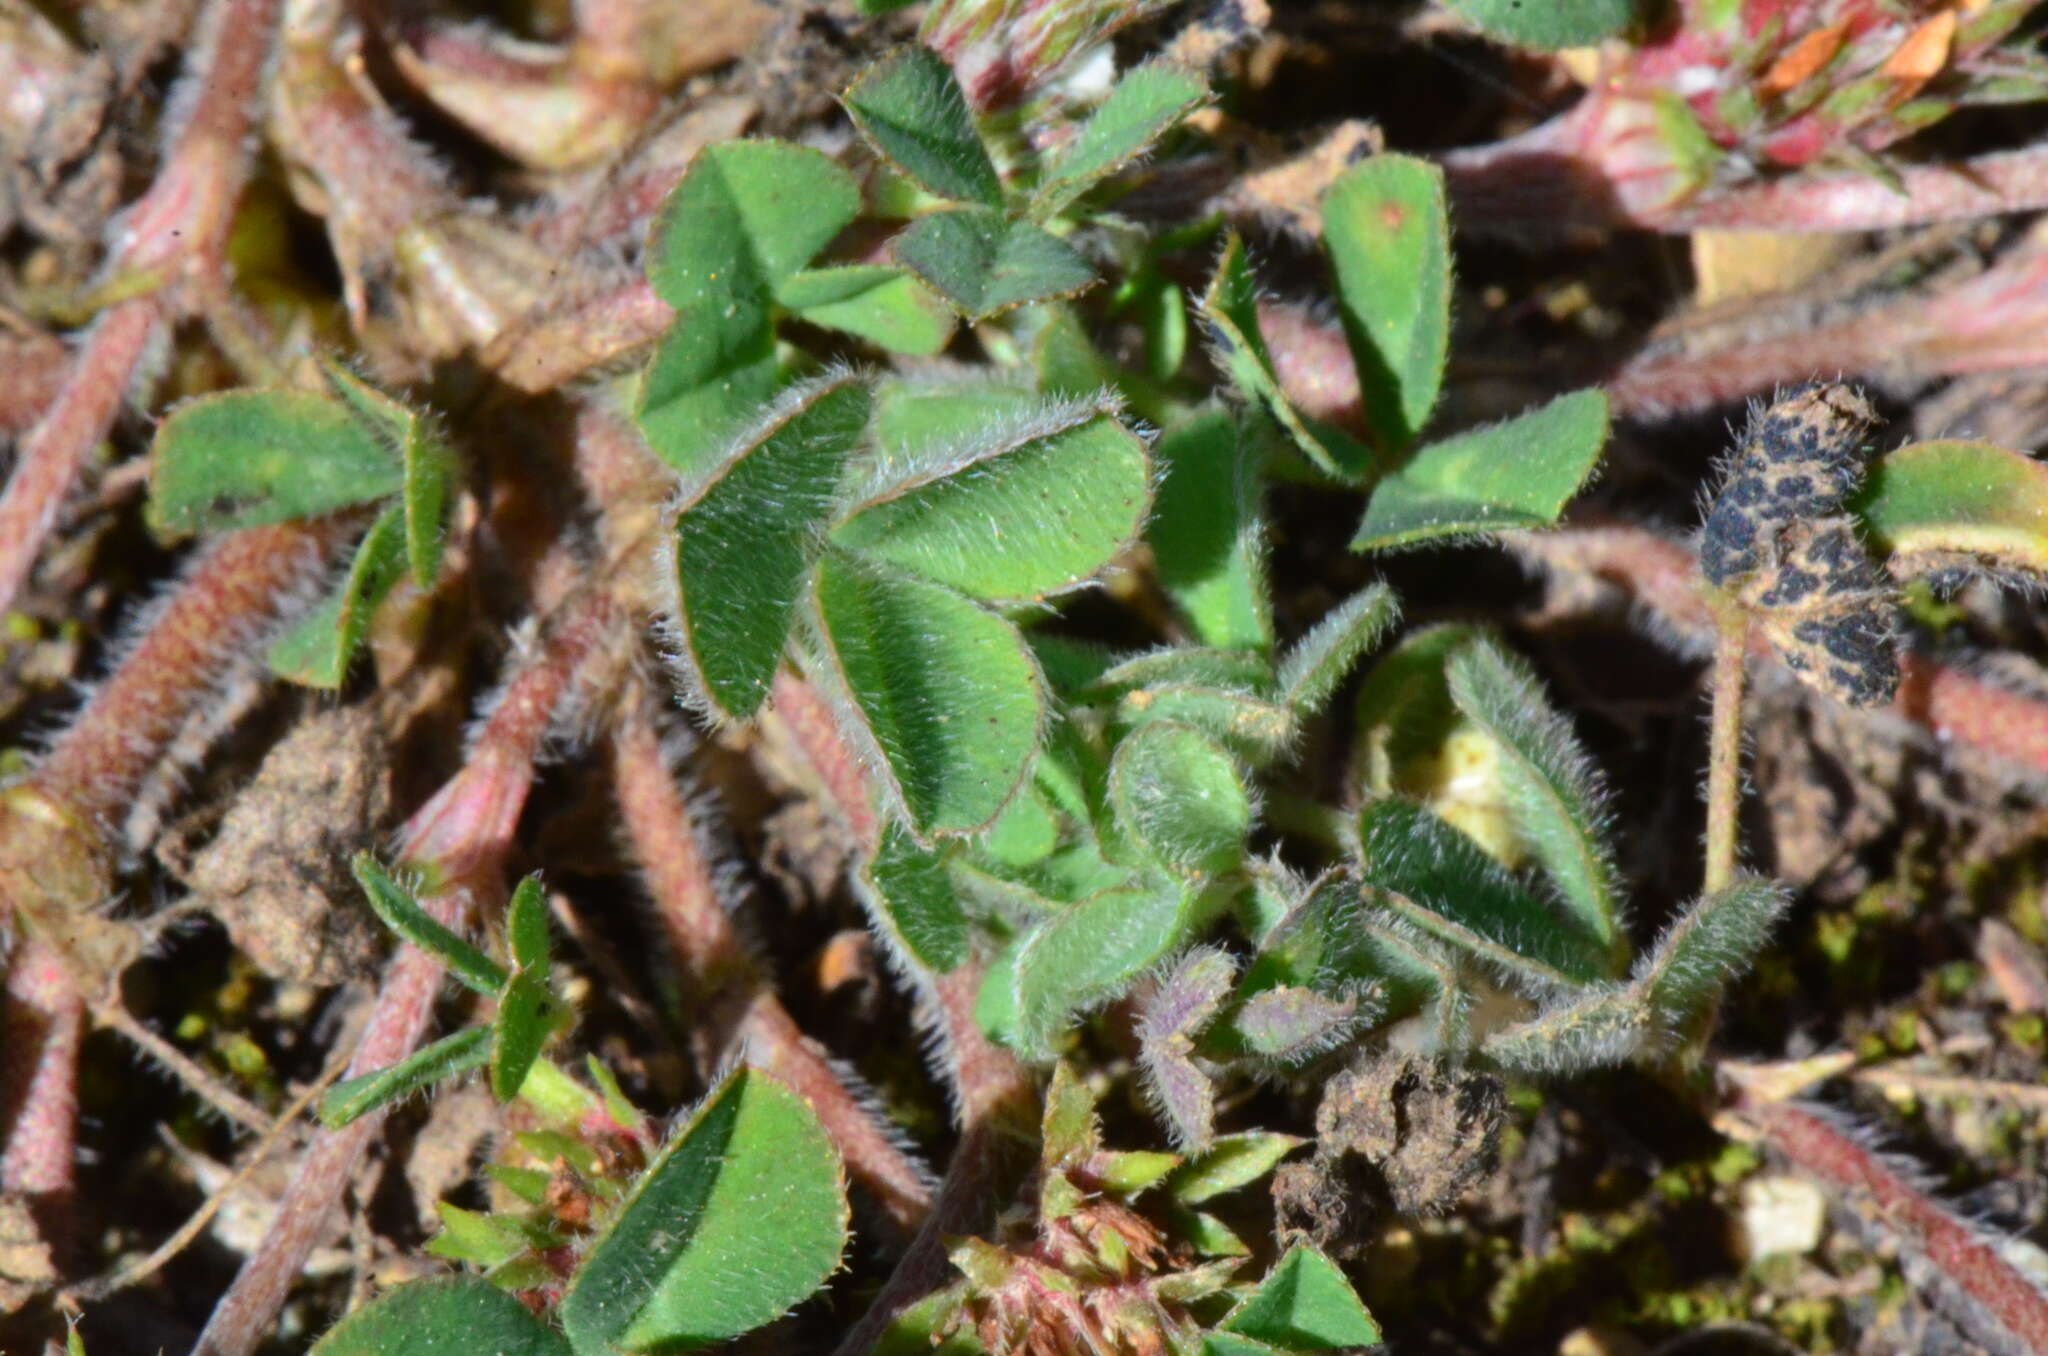 Image of Rough Clover